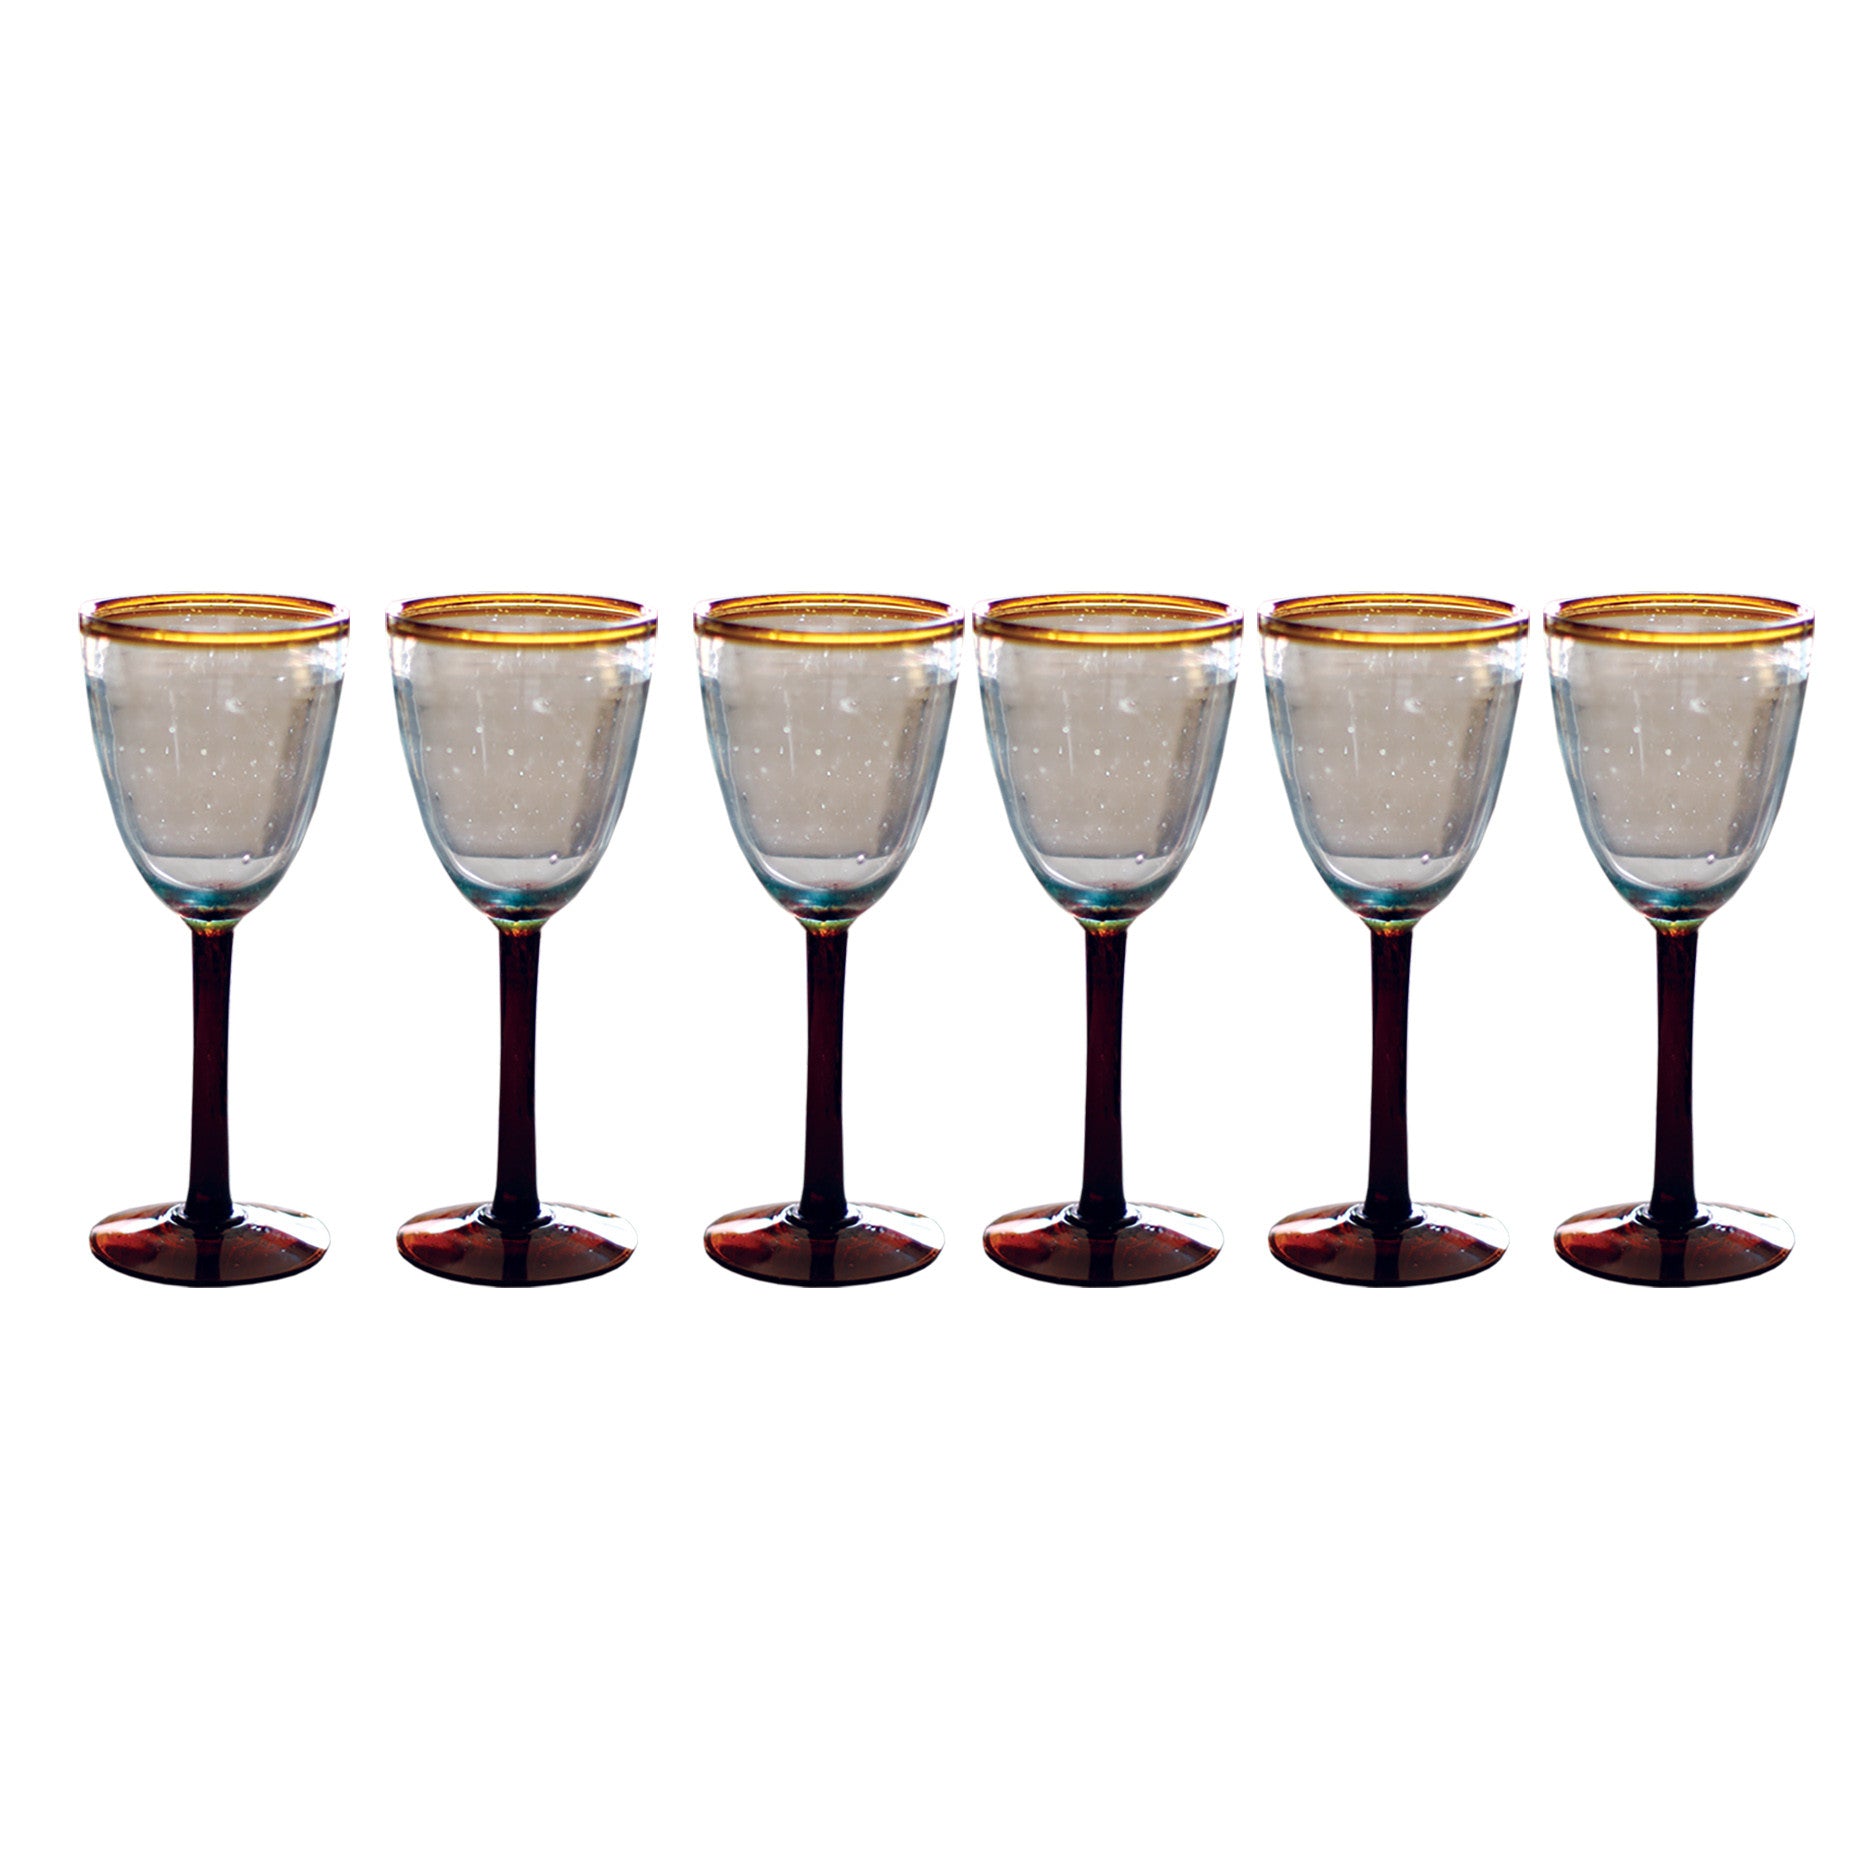 Amber Wine Glasses- Colored Wine Glasses Set Of 6 - Crystal Colorful Wine  Glasses With Long Stem and…See more Amber Wine Glasses- Colored Wine  Glasses